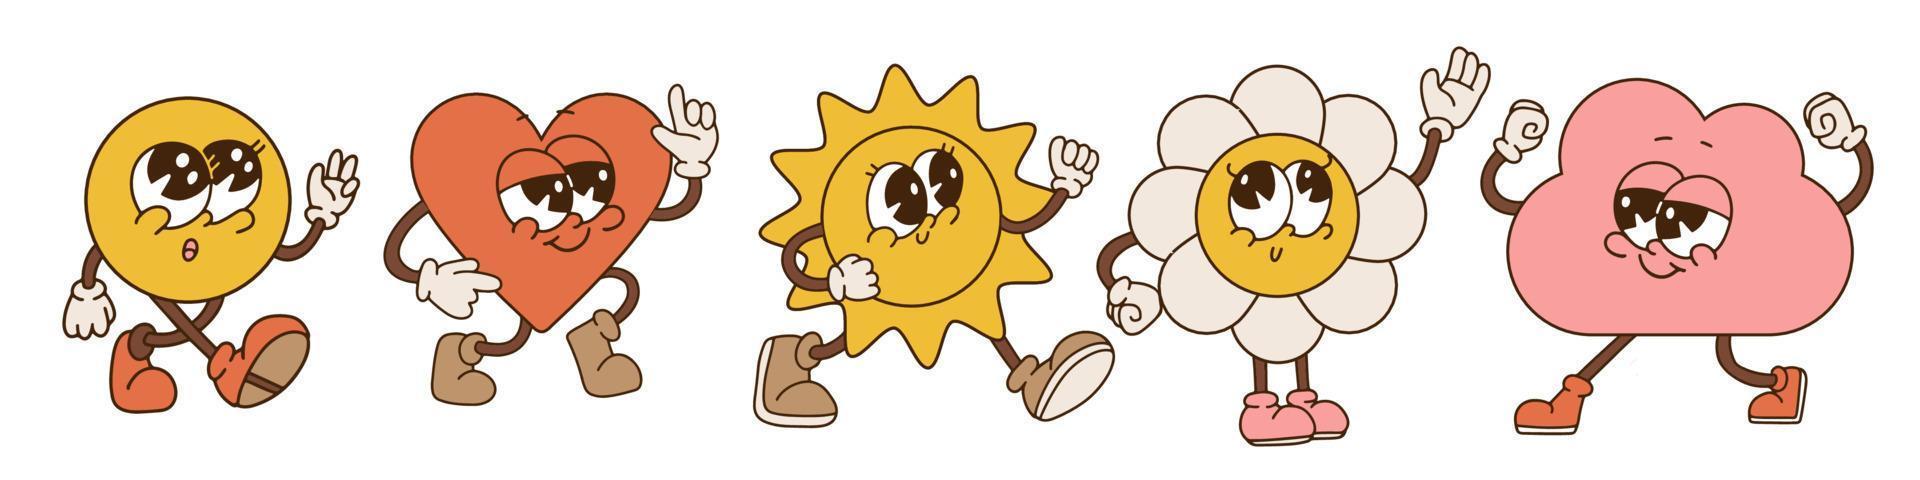 Set of retro cartoon stickers with abstract comic characters with gloved hands. Modern illustration with cute comic mascots. Hand drawn circle, heart, sun, flower and cloud. Vector illustration.